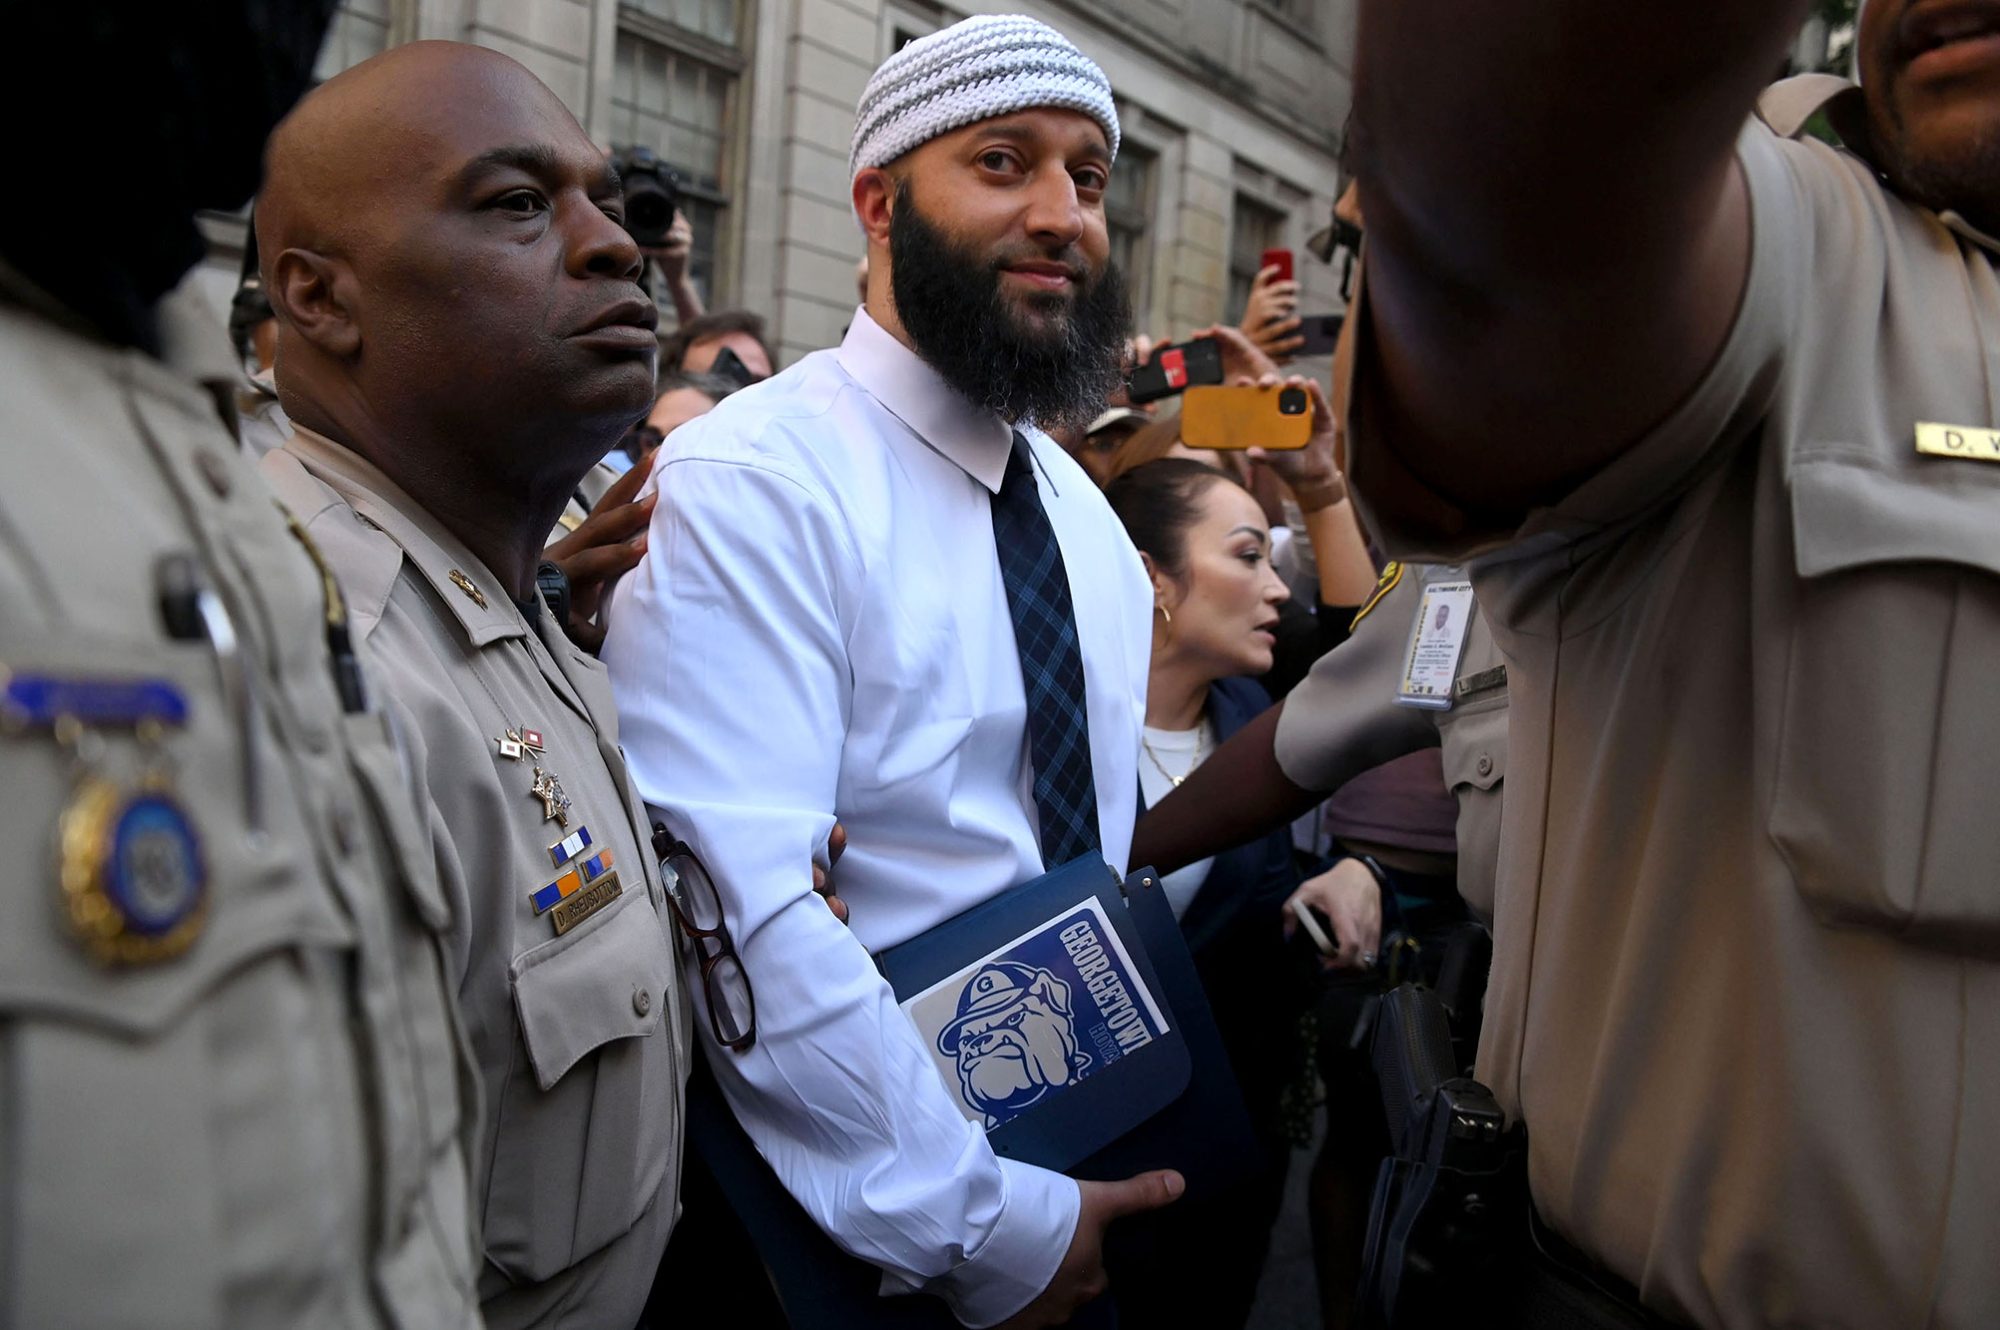 Adnan Syed leaves the courthouse after being released from prison in 2022